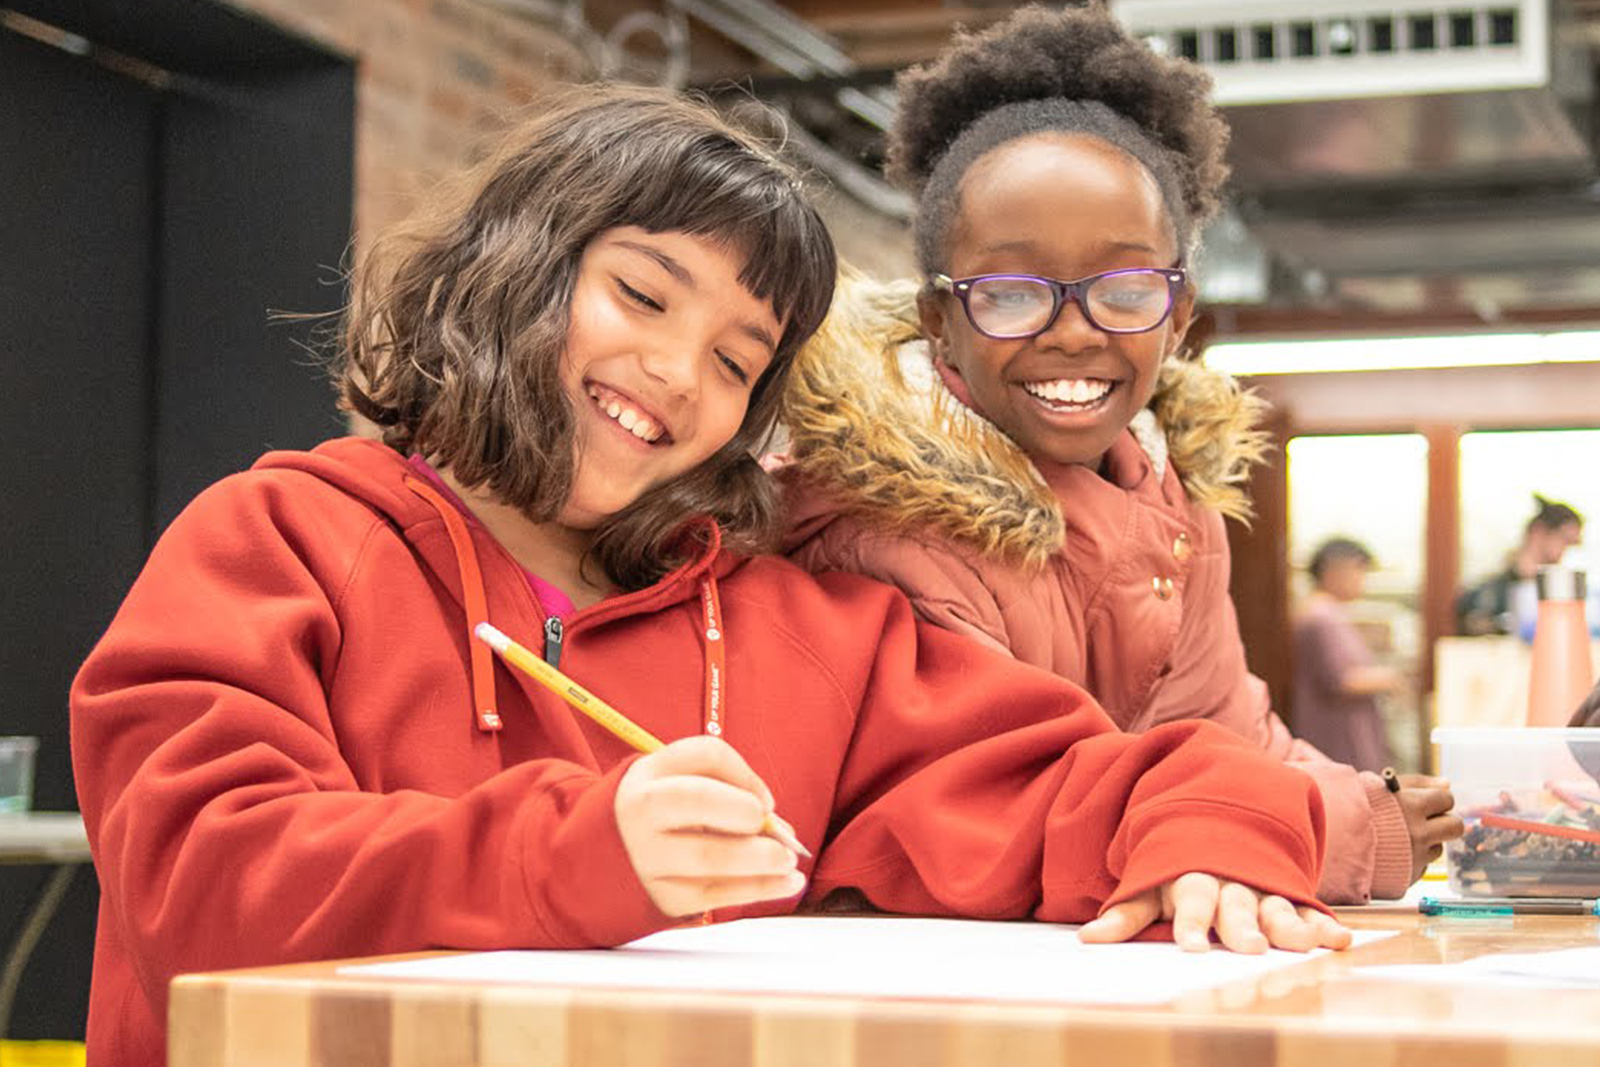 Homepage two young girls smile while working together at a table the girl in the foreground holds a pencil while writing in a notebook